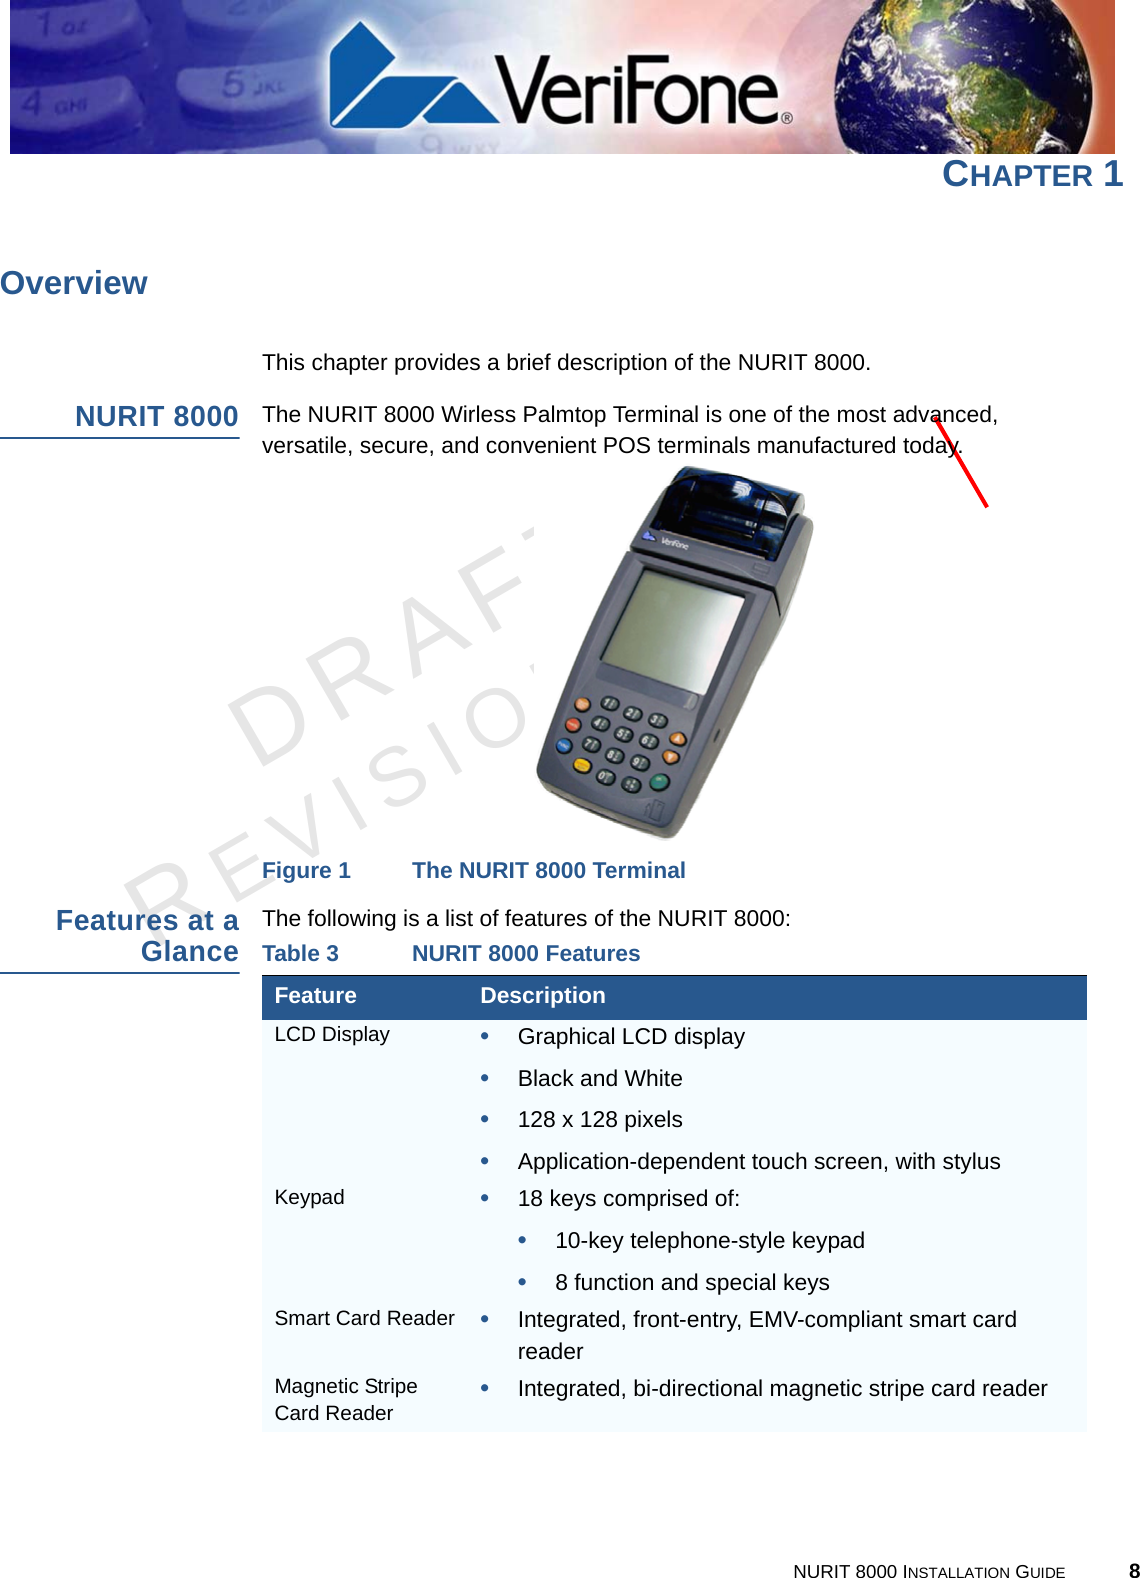 DRAFTREVISION A.3NURIT 8000 INSTALLATION GUIDE 8CHAPTER 1OverviewThis chapter provides a brief description of the NURIT 8000.NURIT 8000The NURIT 8000 Wirless Palmtop Terminal is one of the most advanced, versatile, secure, and convenient POS terminals manufactured today.Figure 1 The NURIT 8000 TerminalFeatures at aGlanceThe following is a list of features of the NURIT 8000:Table 3 NURIT 8000 FeaturesFeature DescriptionLCD Display •Graphical LCD display•Black and White•128 x 128 pixels•Application-dependent touch screen, with stylusKeypad •18 keys comprised of:•10-key telephone-style keypad•8 function and special keysSmart Card Reader •Integrated, front-entry, EMV-compliant smart card readerMagnetic Stripe Card Reader •Integrated, bi-directional magnetic stripe card reader